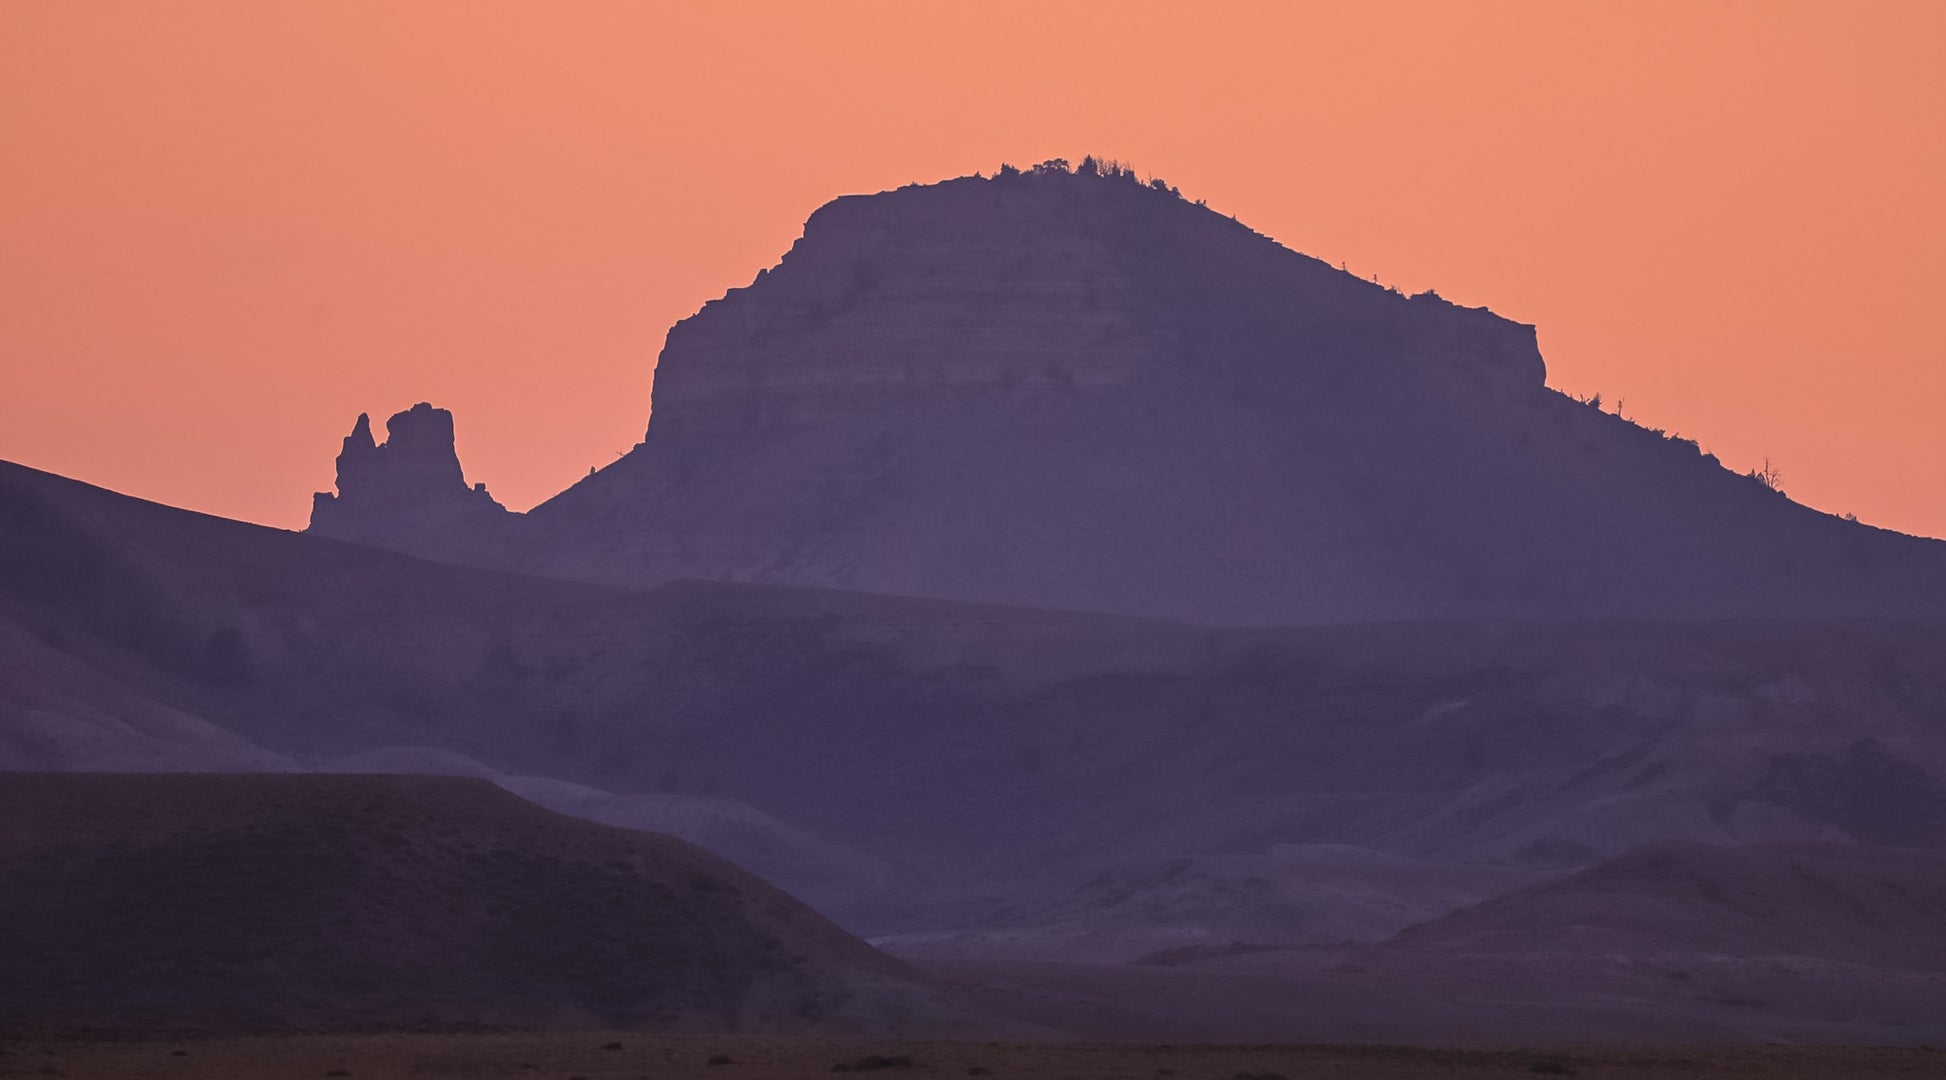 Sunset photography of the Oregon Buttes Oregon Buttes, Red Desert Jason Sondgeroth, Artist  Photograph  Red Desert, Wyoming  Oregon Buttes Sunset  12" X 8"  Cardstock for support  Clear, plastic sleeve for protection  Oregon Buttes: Wyoming’s northern red desert for the California, Oregon and Mormon Pioneer Trails and Pony Express  The pitted sandstone outcrops along the rim, along with twisted juniper trees and dense sagebrush, attract mule deer and resident desert elk